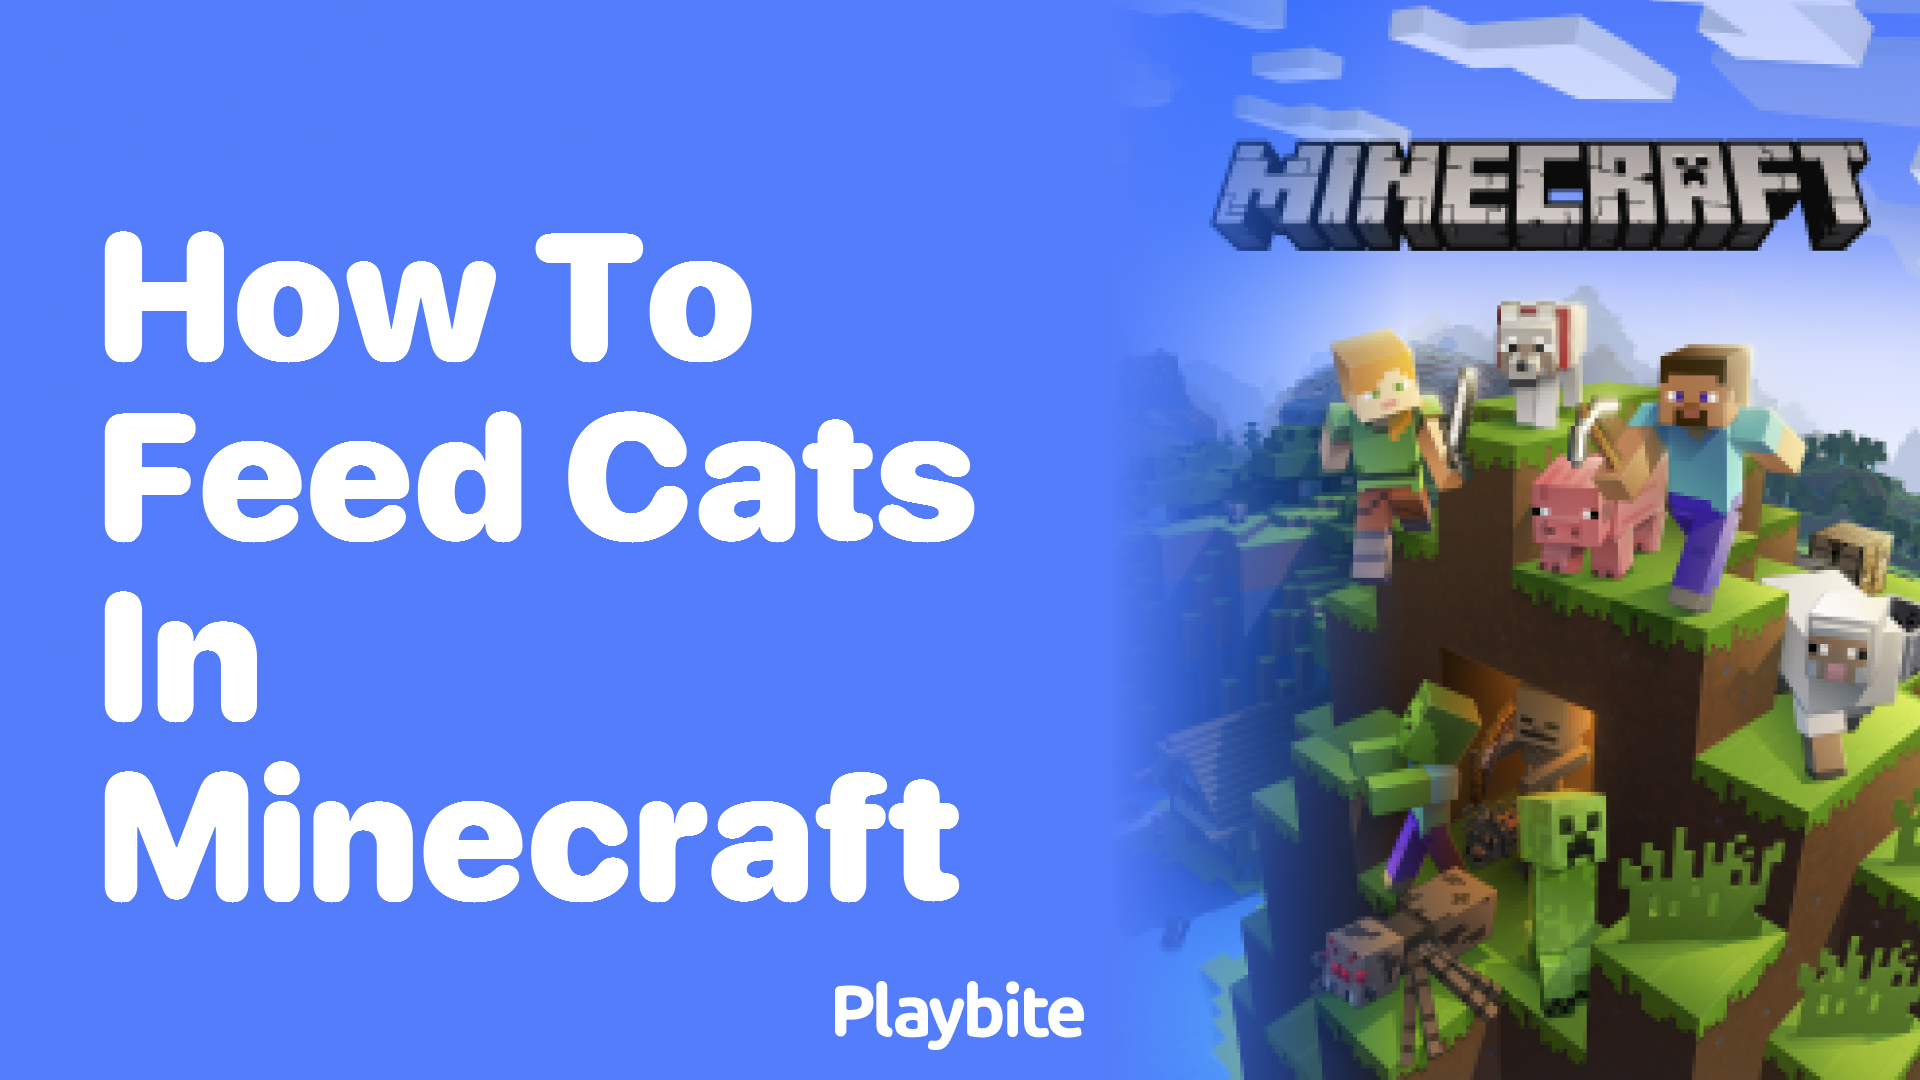 How to Feed Cats in Minecraft: A Simple Guide - Playbite